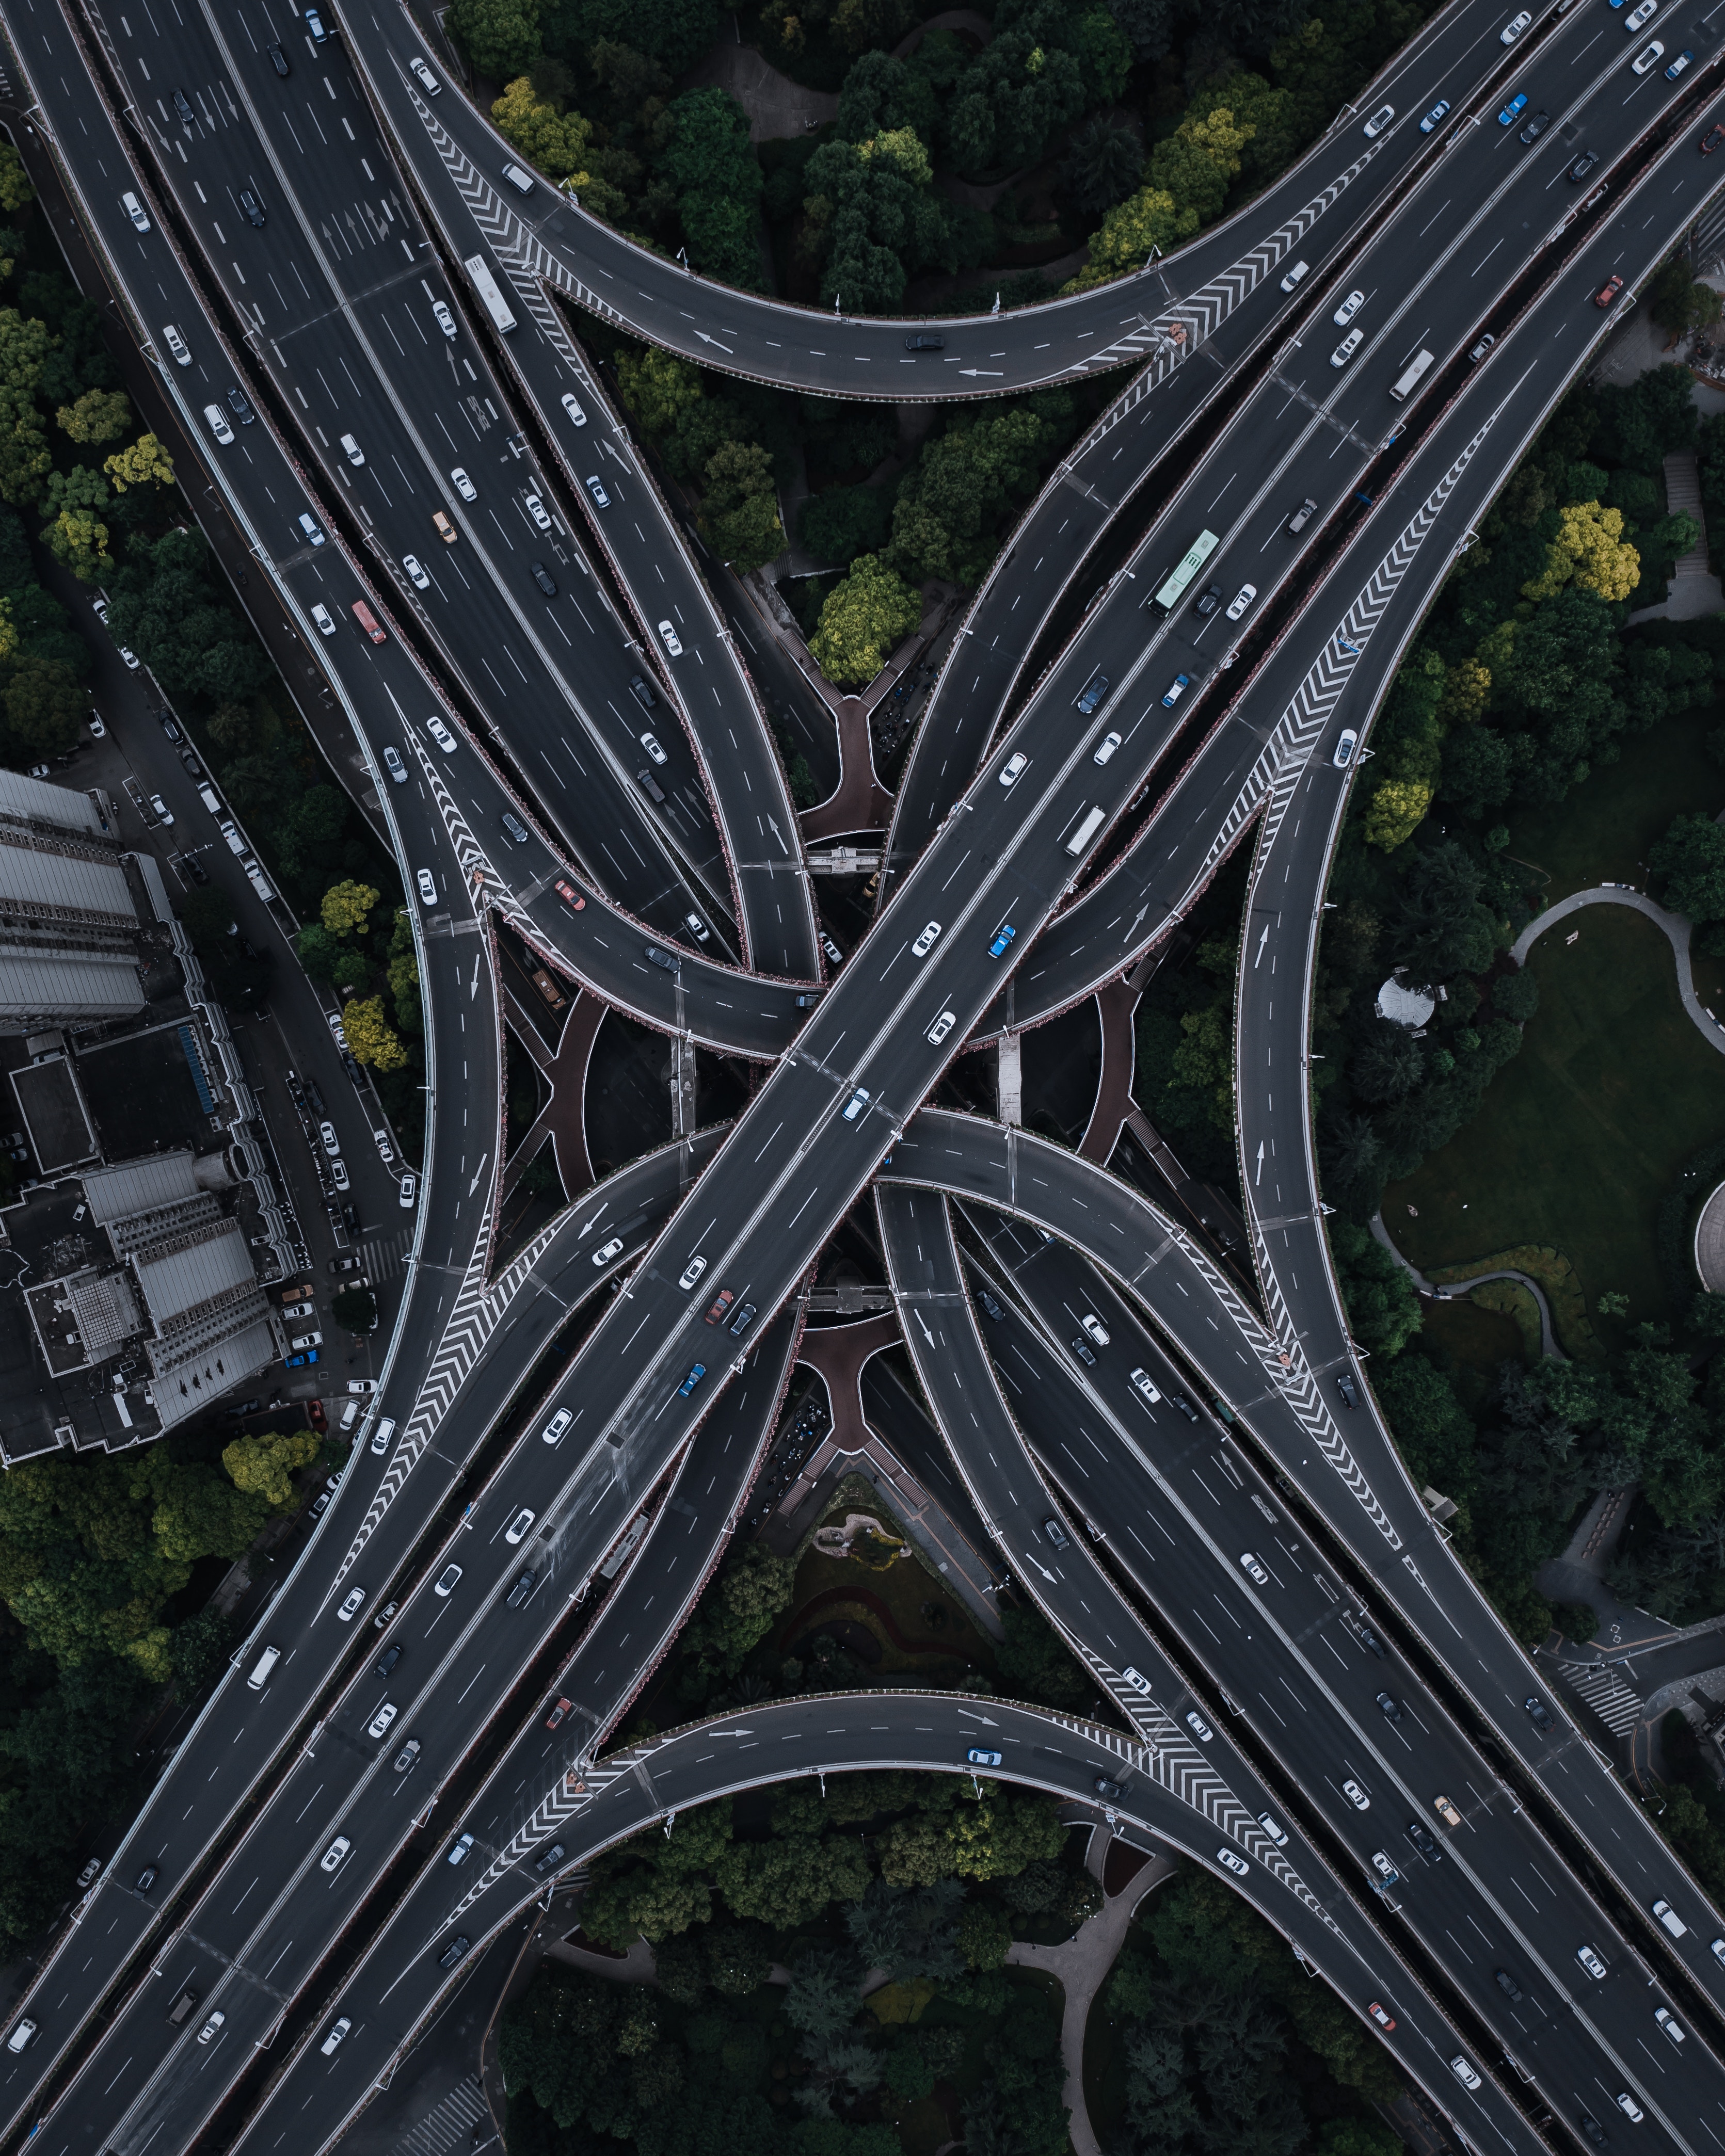 view from above, intricate, miscellanea, miscellaneous, road, confused, transport interchange, interchange, tiered, multilevel phone wallpaper